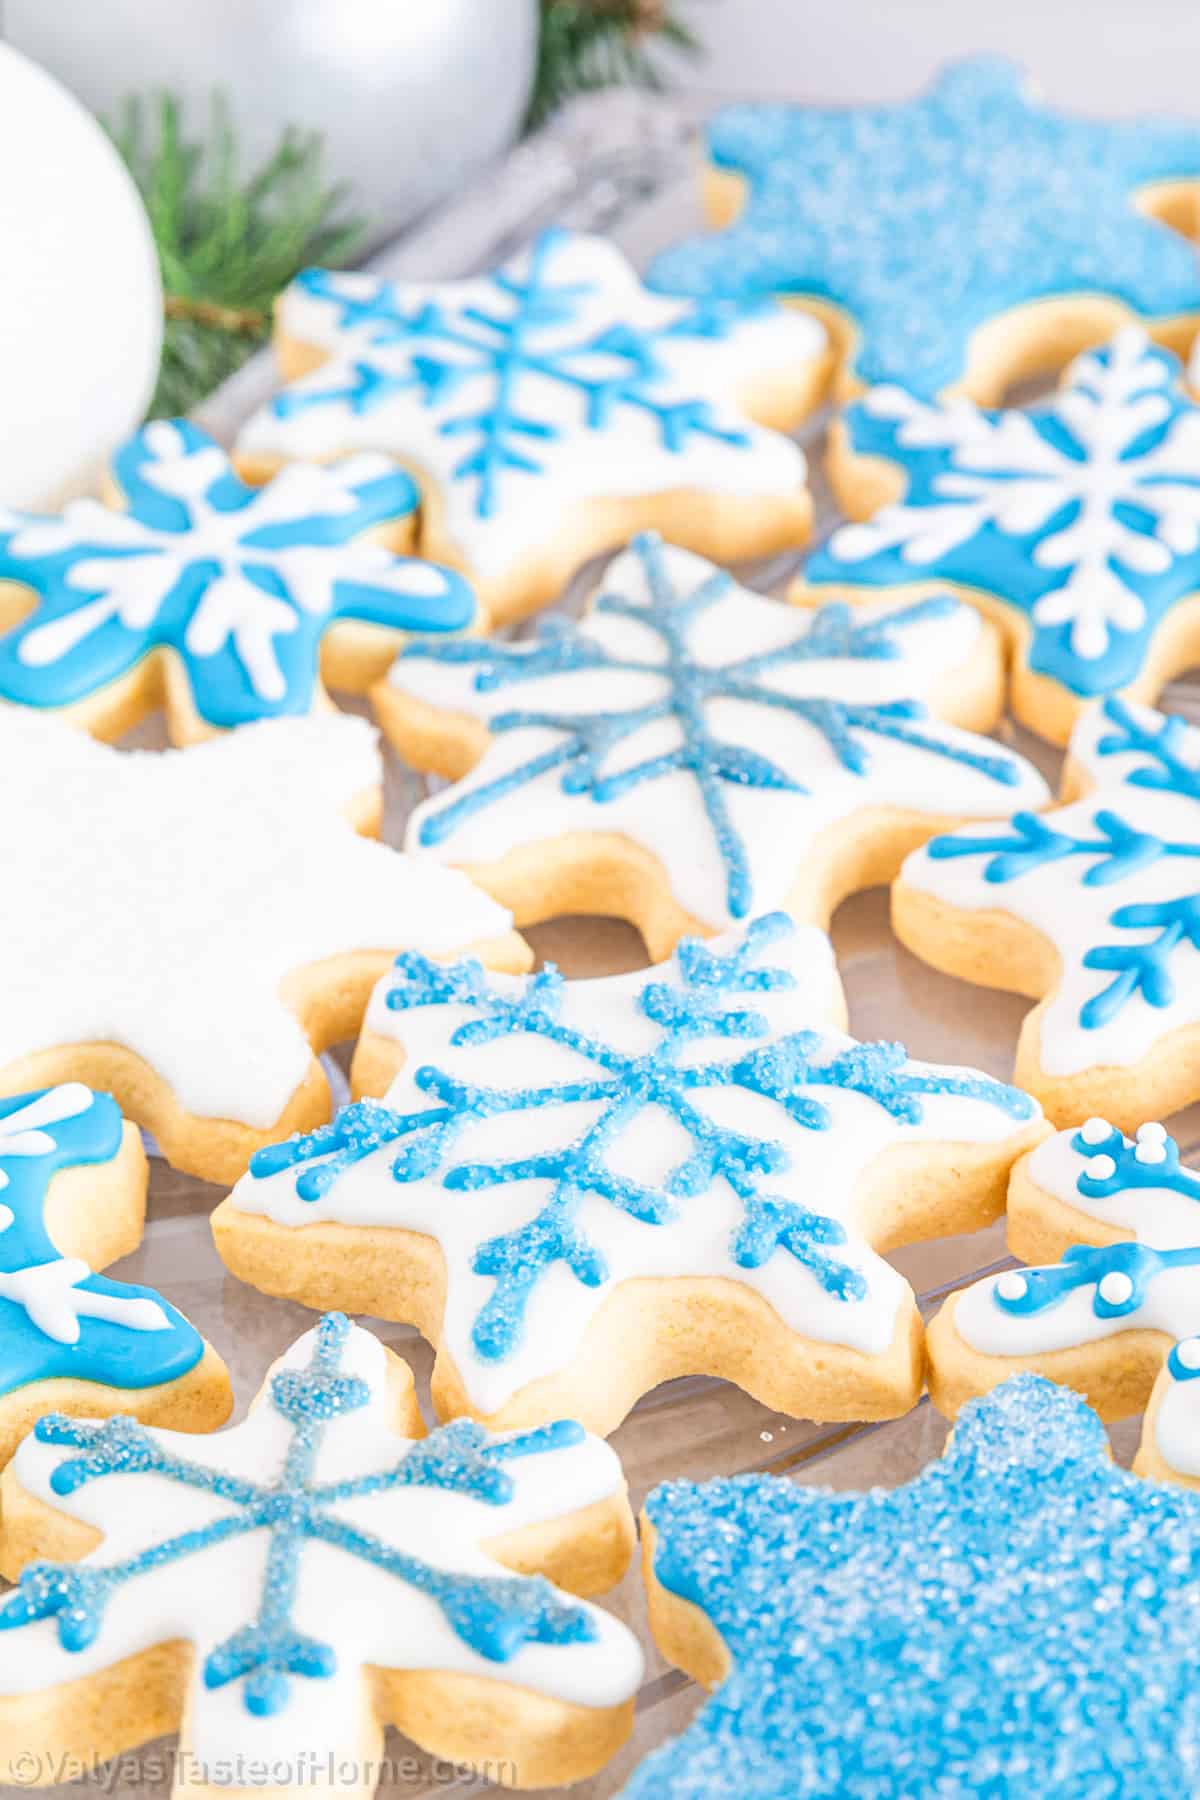 Making snowflake cookies with royal icing at home is a fun activity that can involve the entire family. 